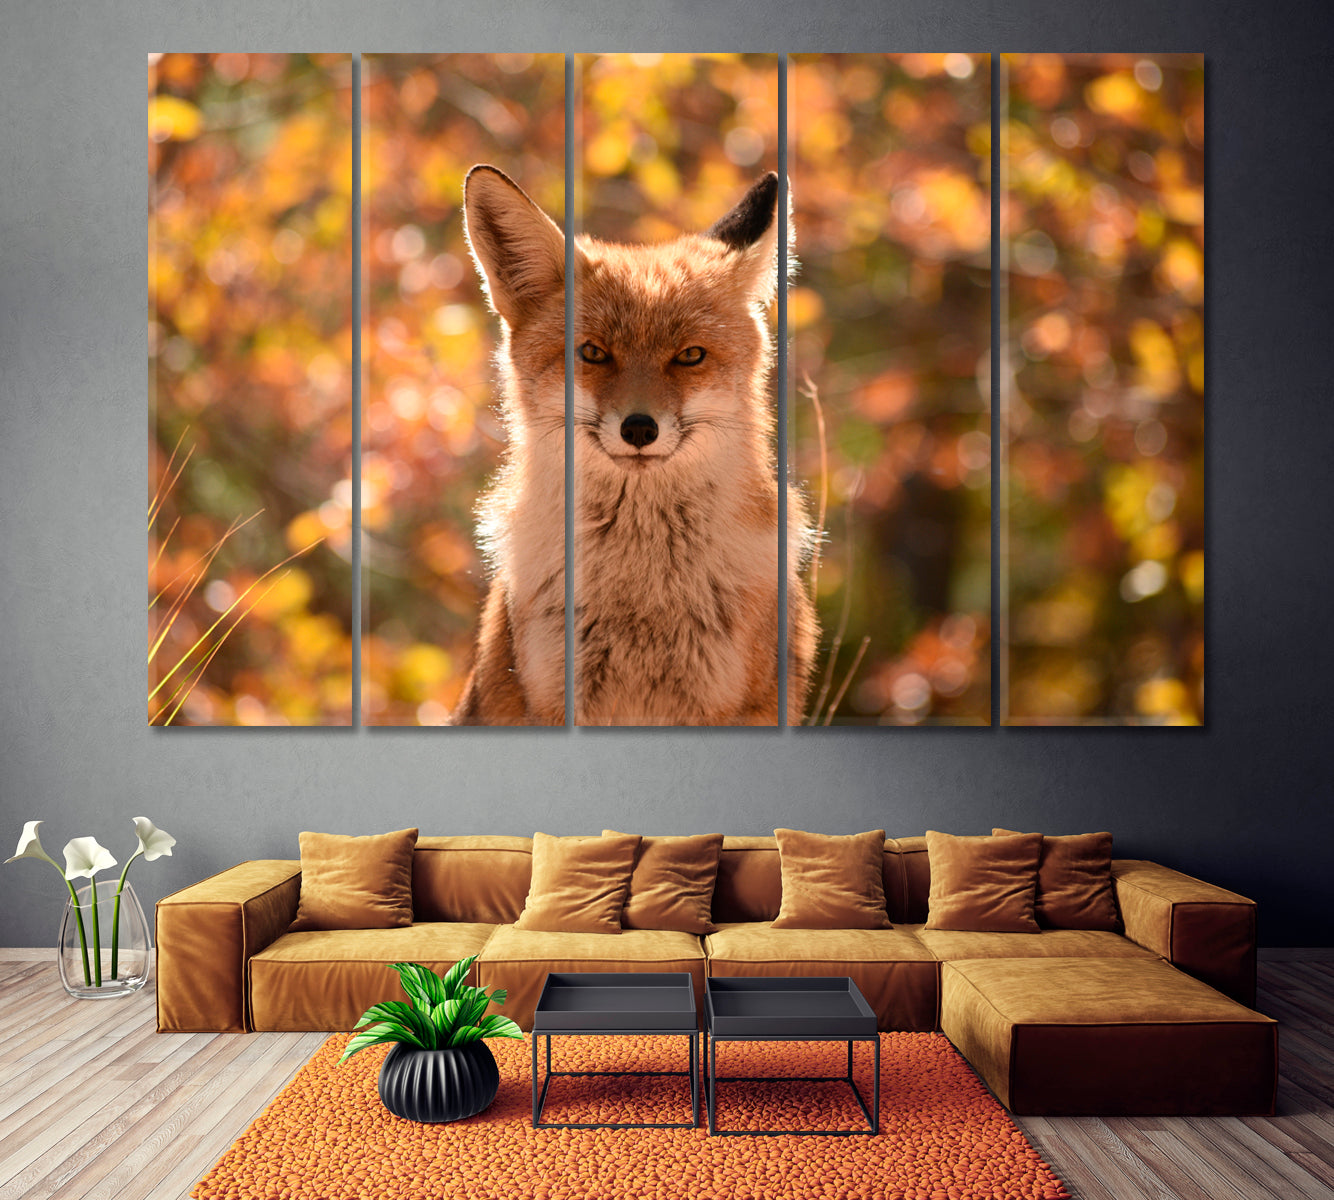 Cute Fox in Autumn Forest Canvas Print ArtLexy 5 Panels 36"x24" inches 